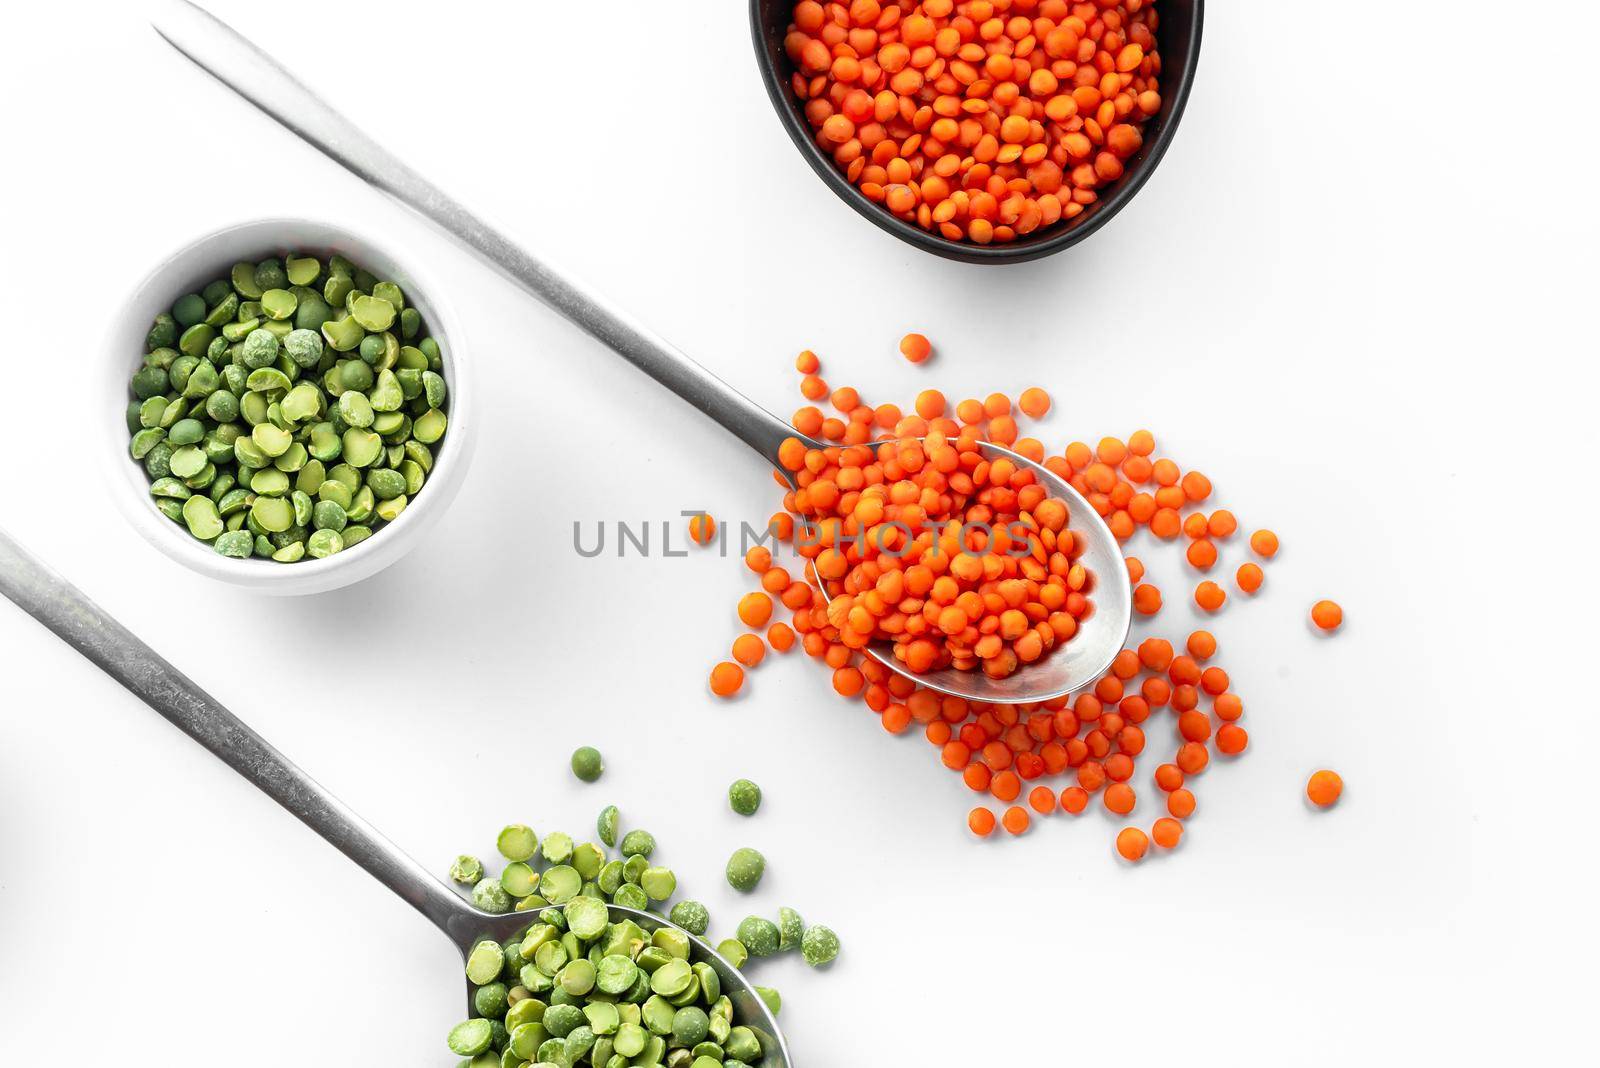 Red Lentils and green peas on a white background. superfood healthy food alternative to basic cereals. Gluten free. Ancient grain food